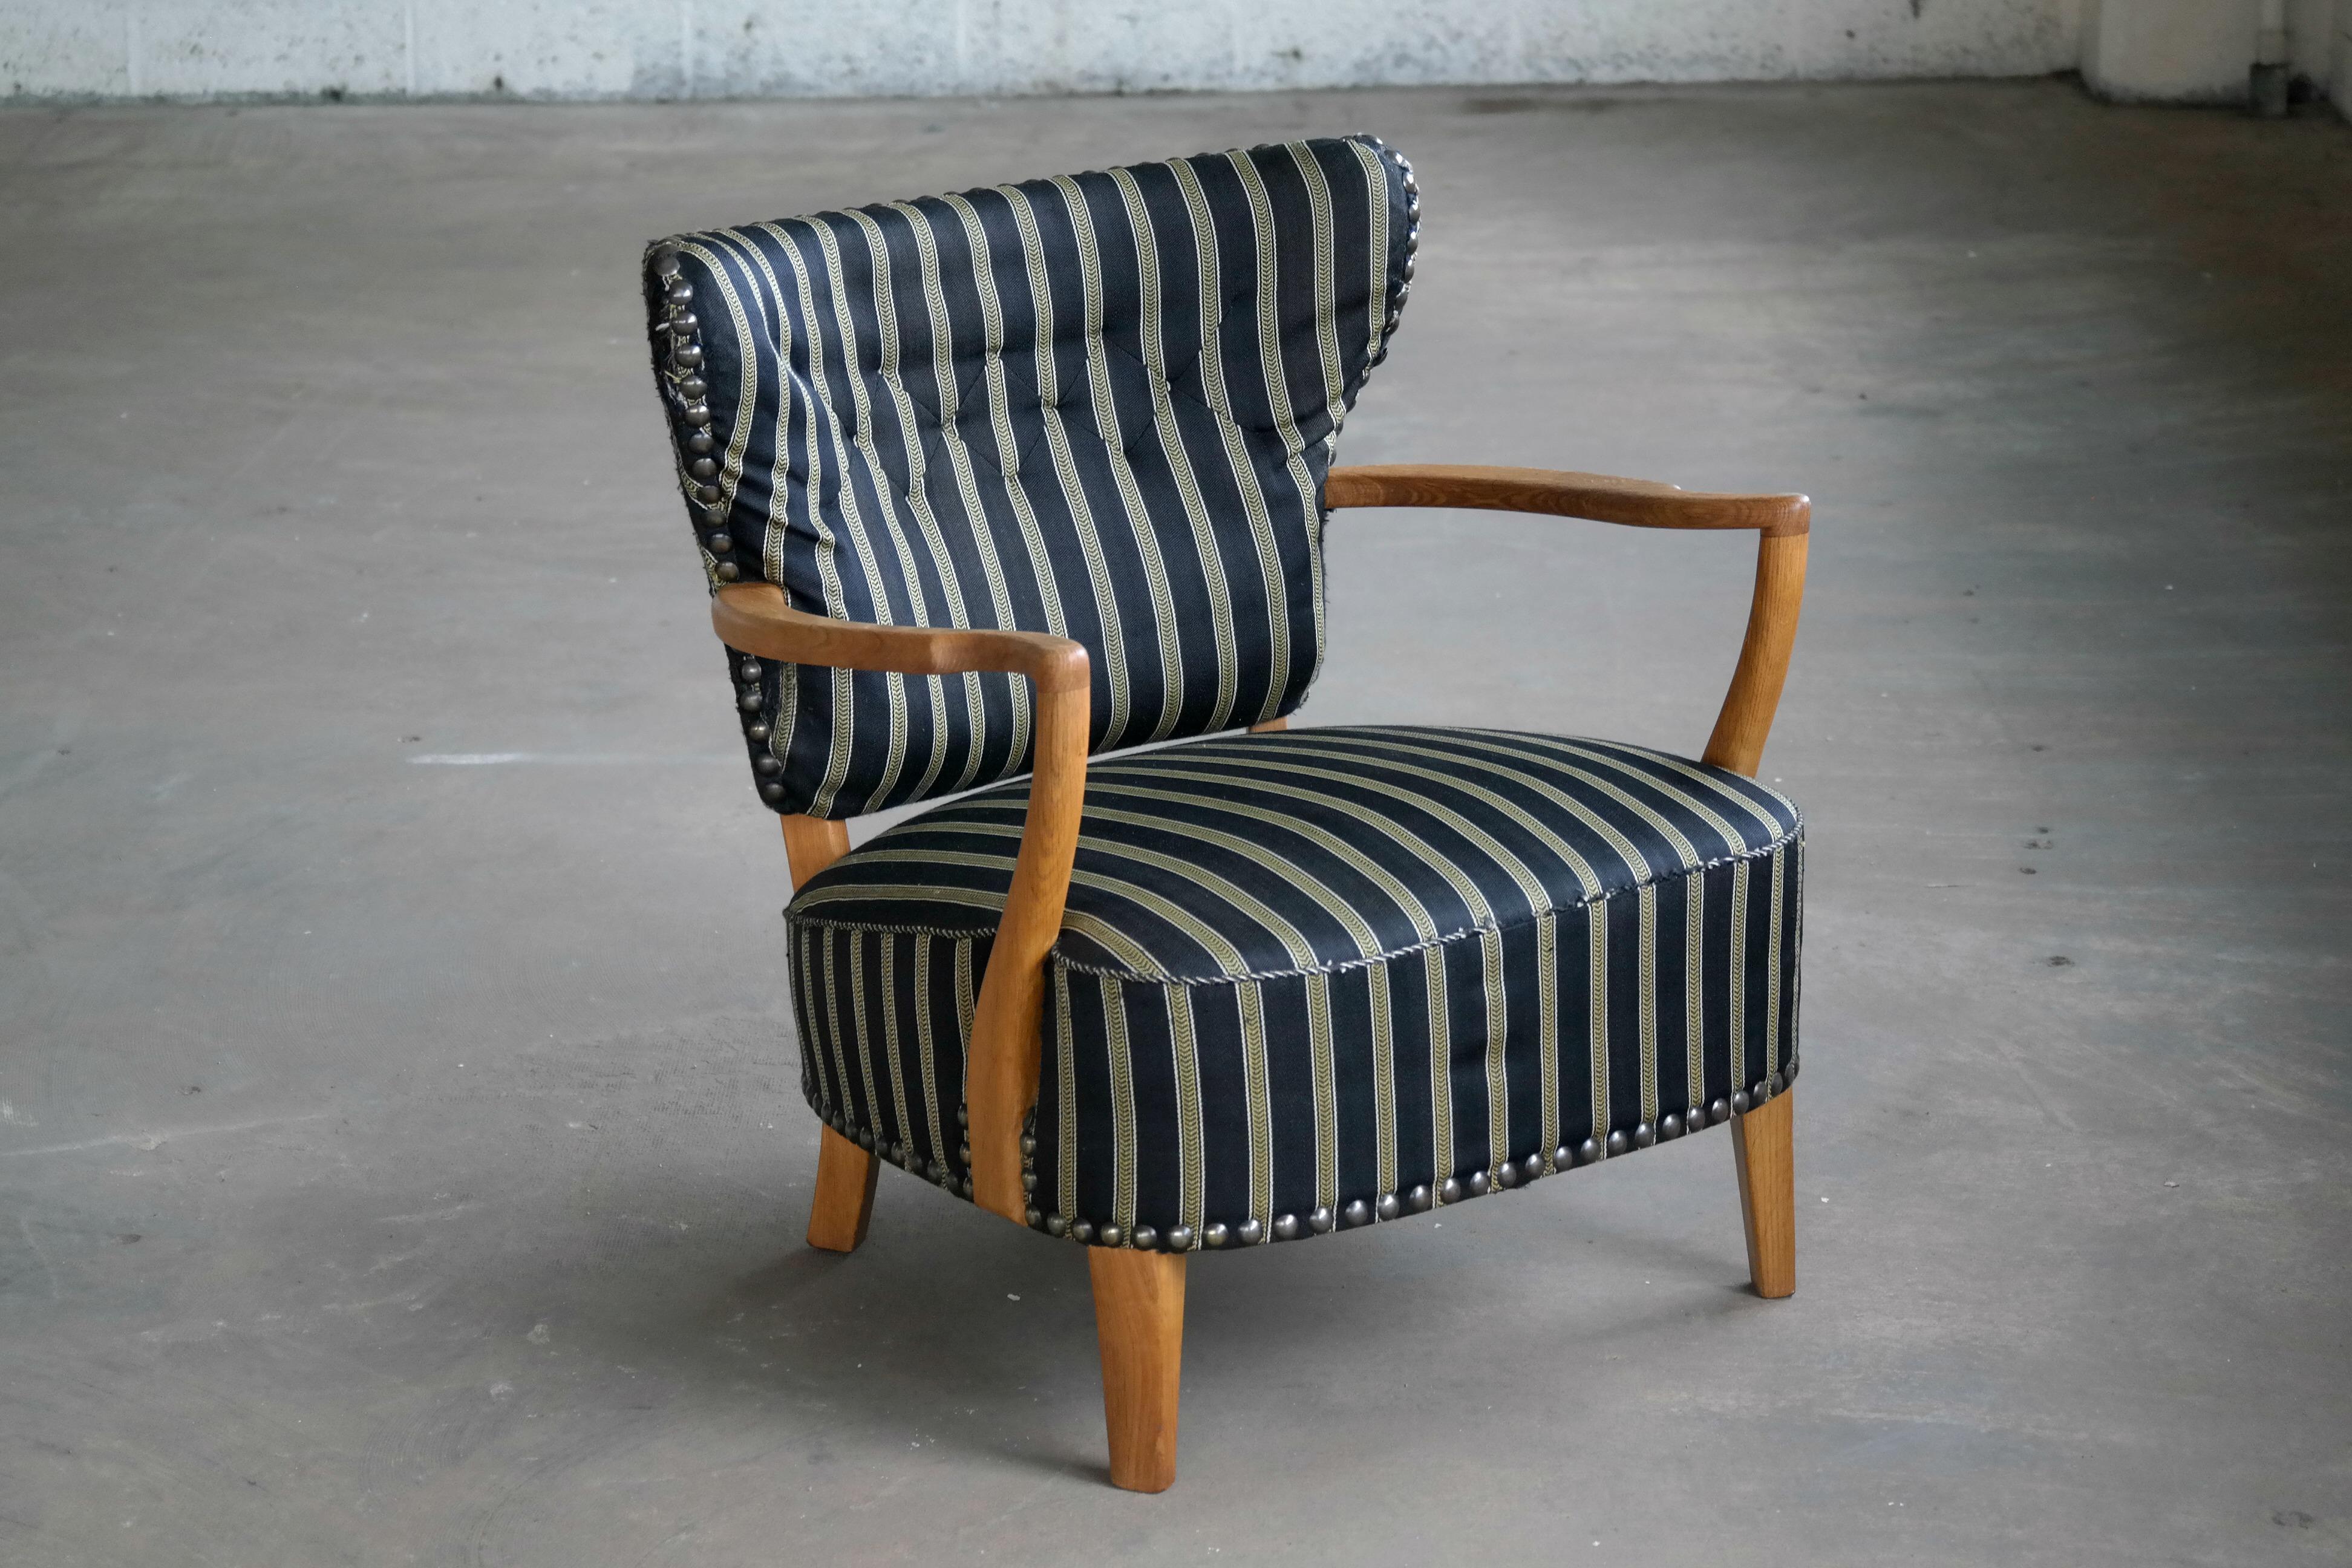 Fantastic 1940s Otto Schulz style lounge chair made by unknown Danish master carpenter sometime in the 1930s or 1940s. The style is similar to that of Schulz with the typical separation between the seat and back rest, however this chair has armrests